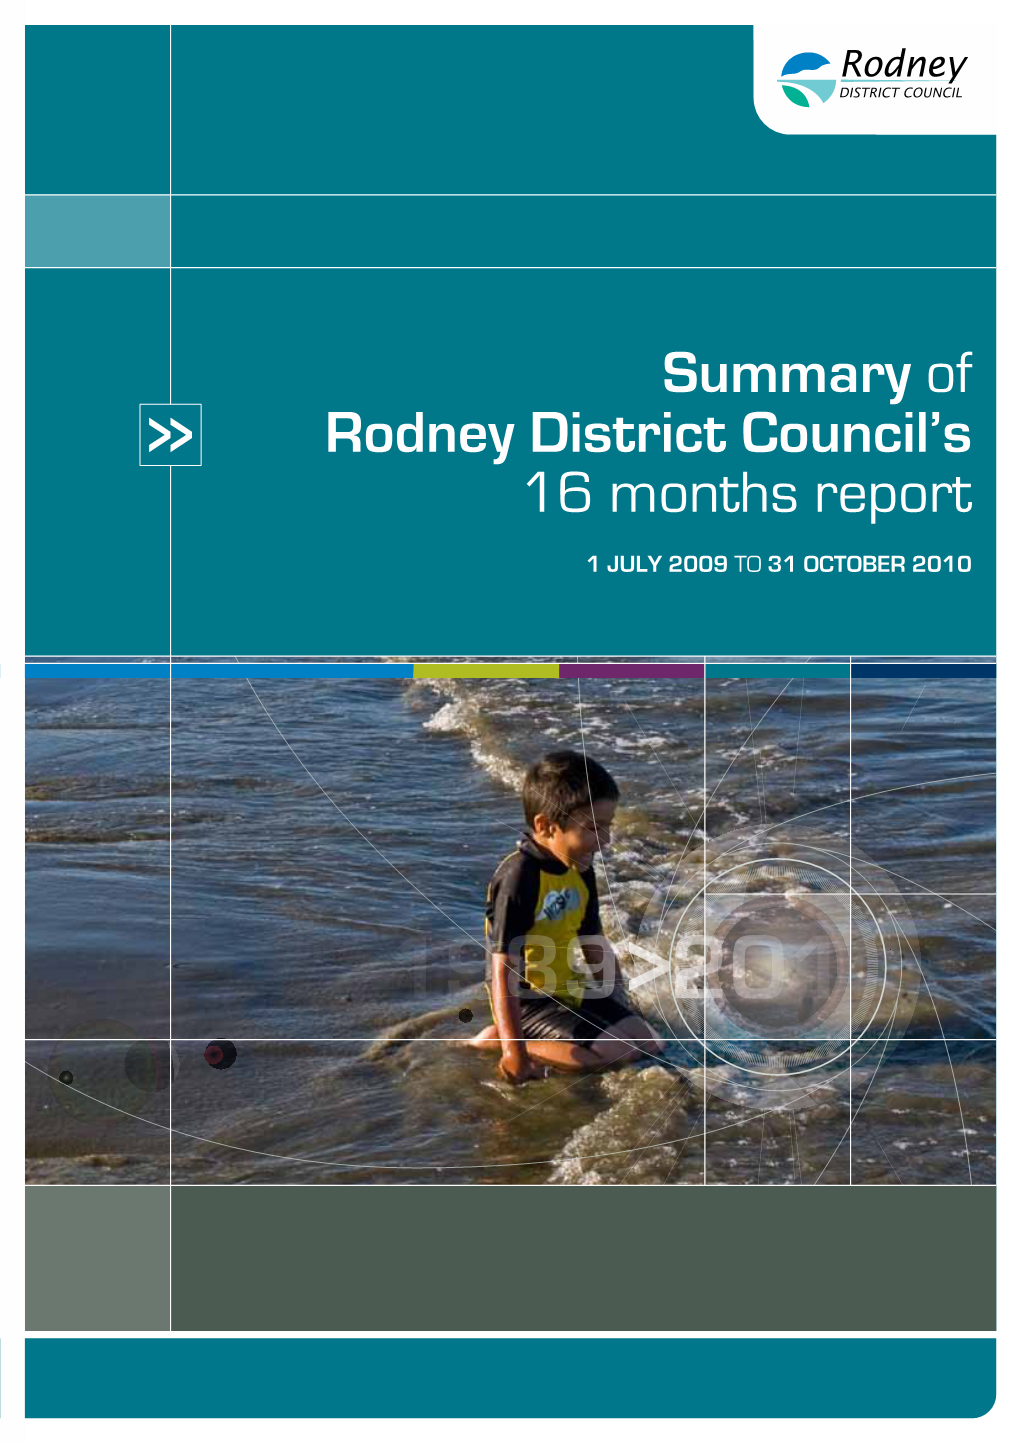 Rodney District Council Annual Report 2009-2010 Summary